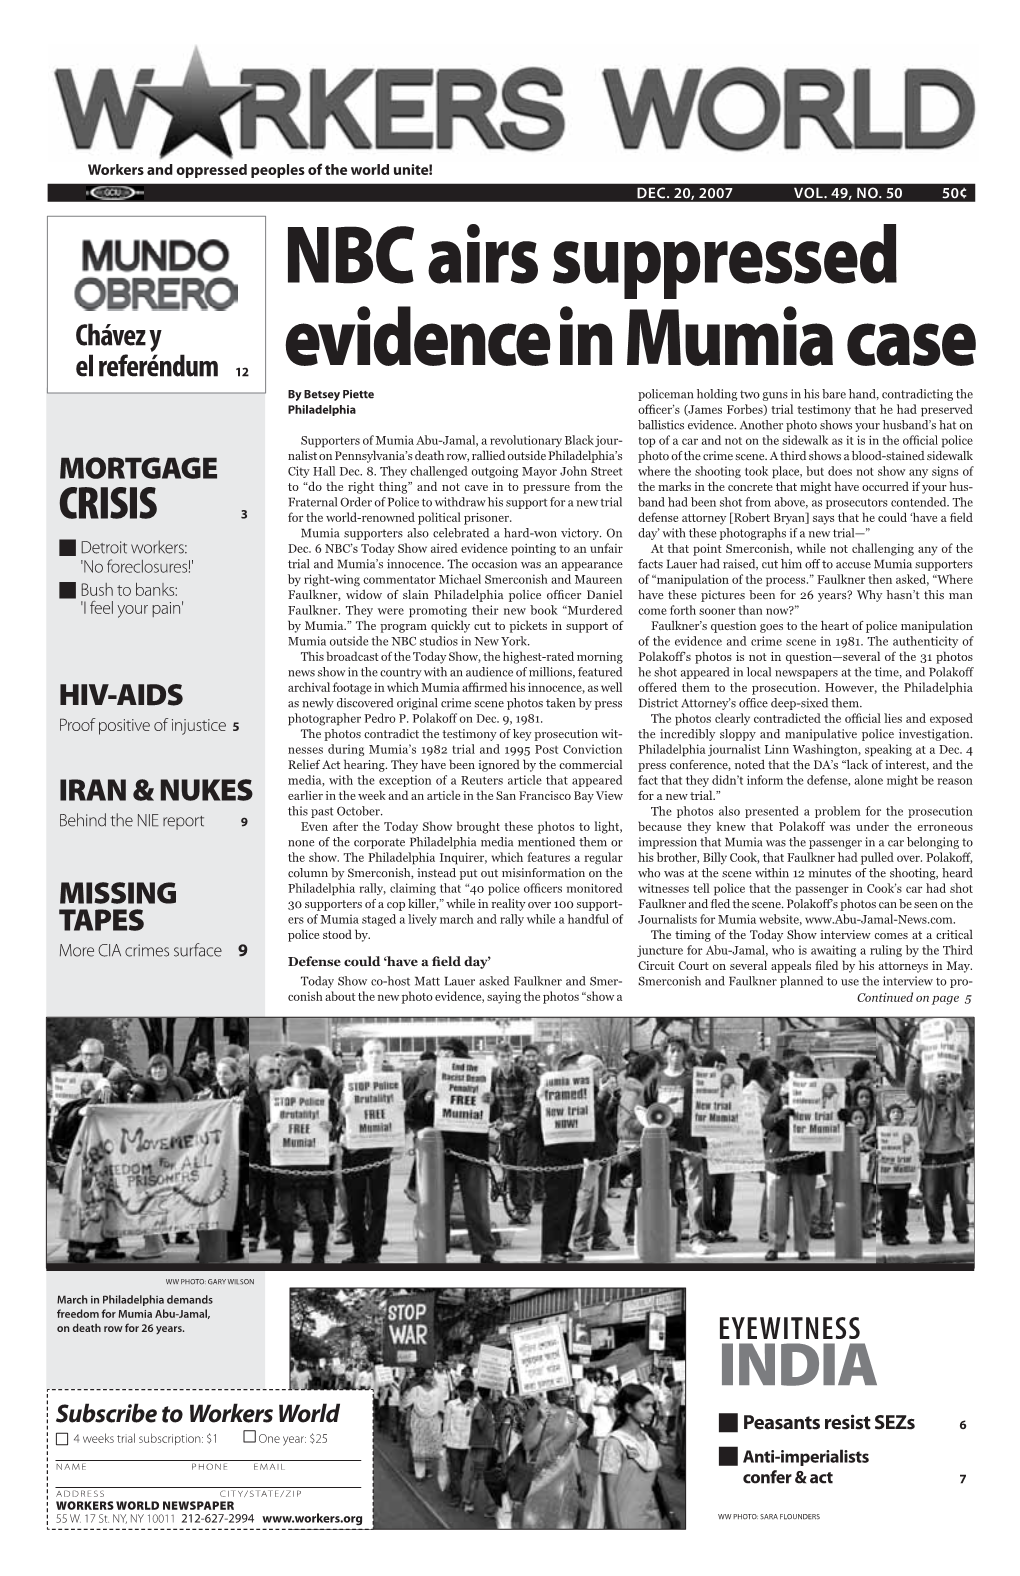 NBC Airs Suppressed Evidence in Mumia Case